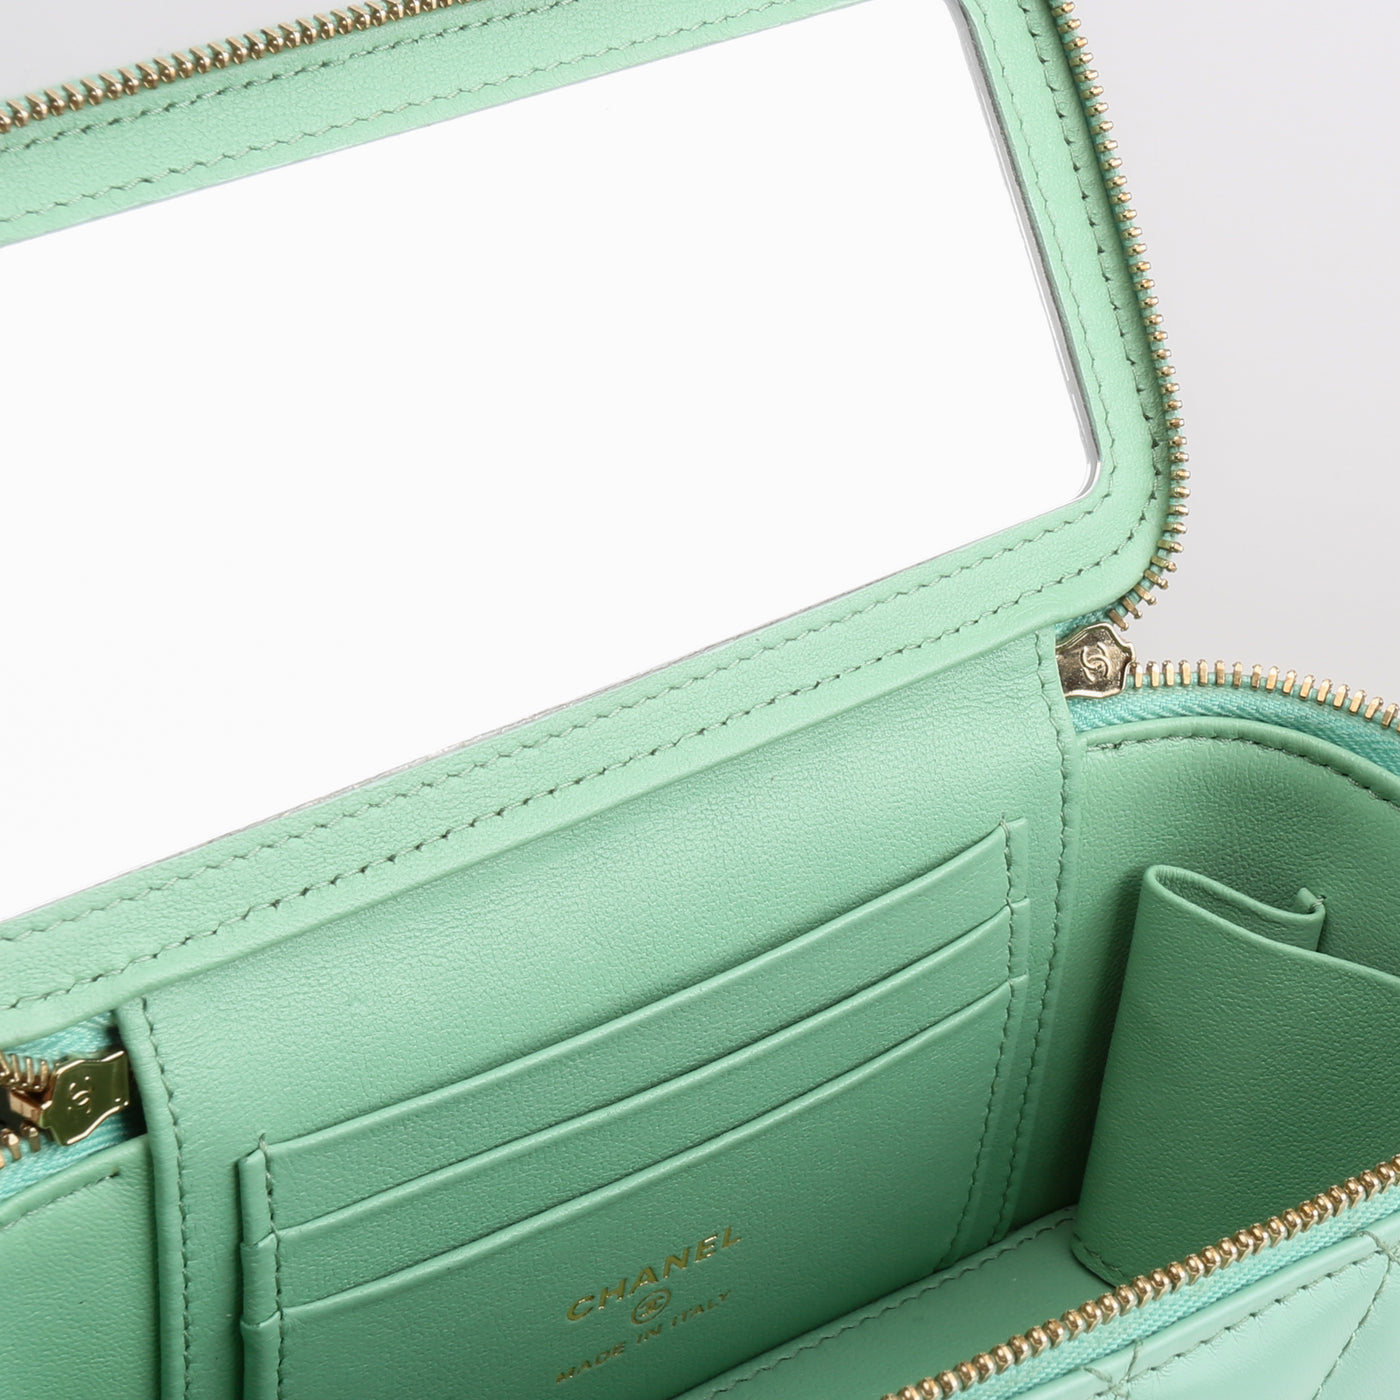 CHANEL Pick Me Up Logo Handle Small Vanity Case - Mint Green